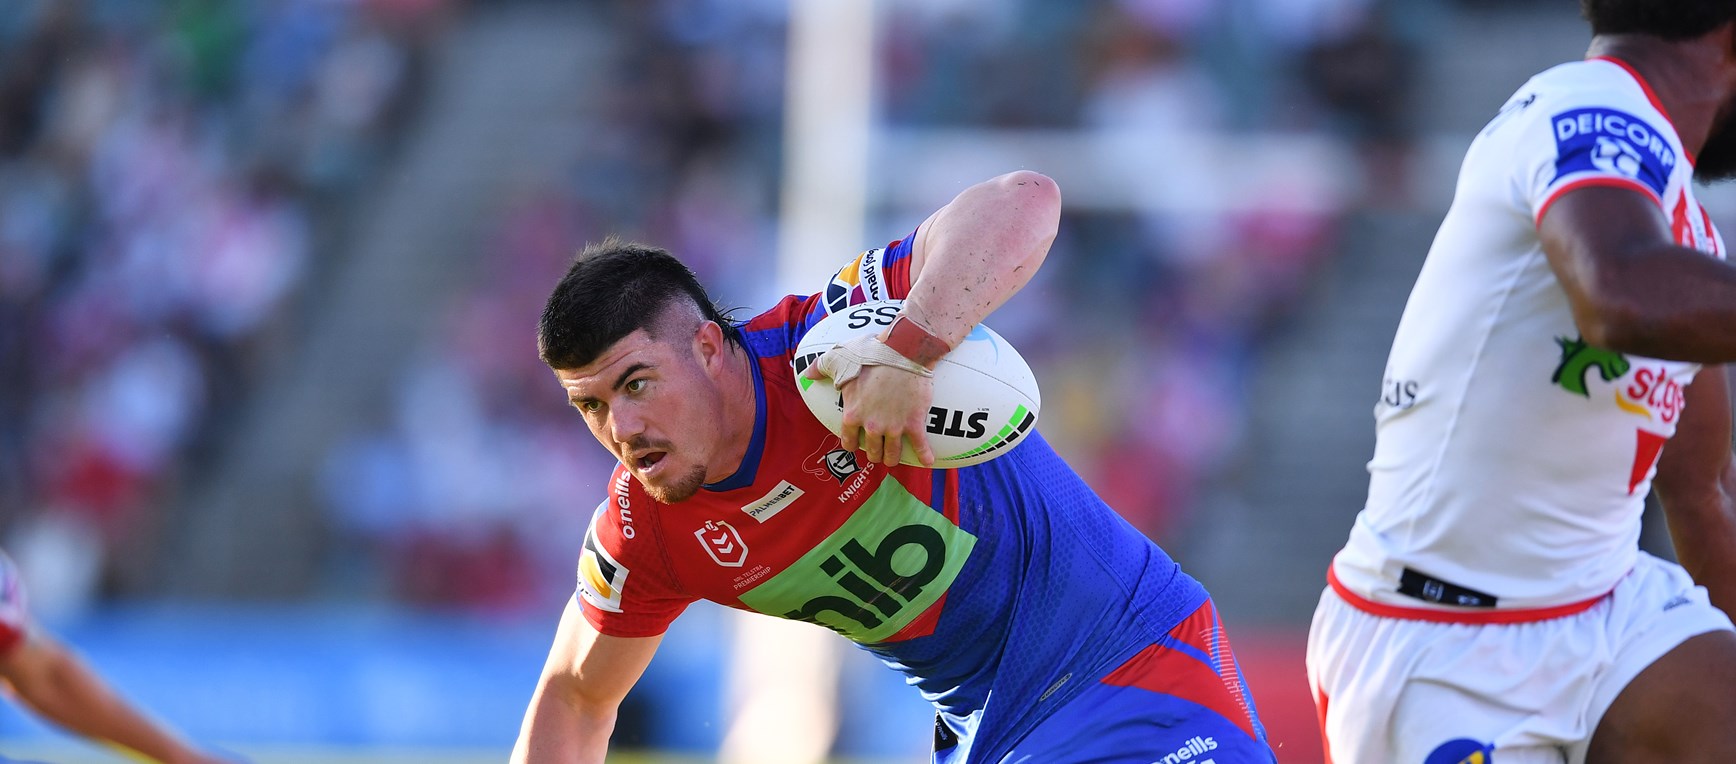 Gallery: Knights stunned by Dragons in Wollongong